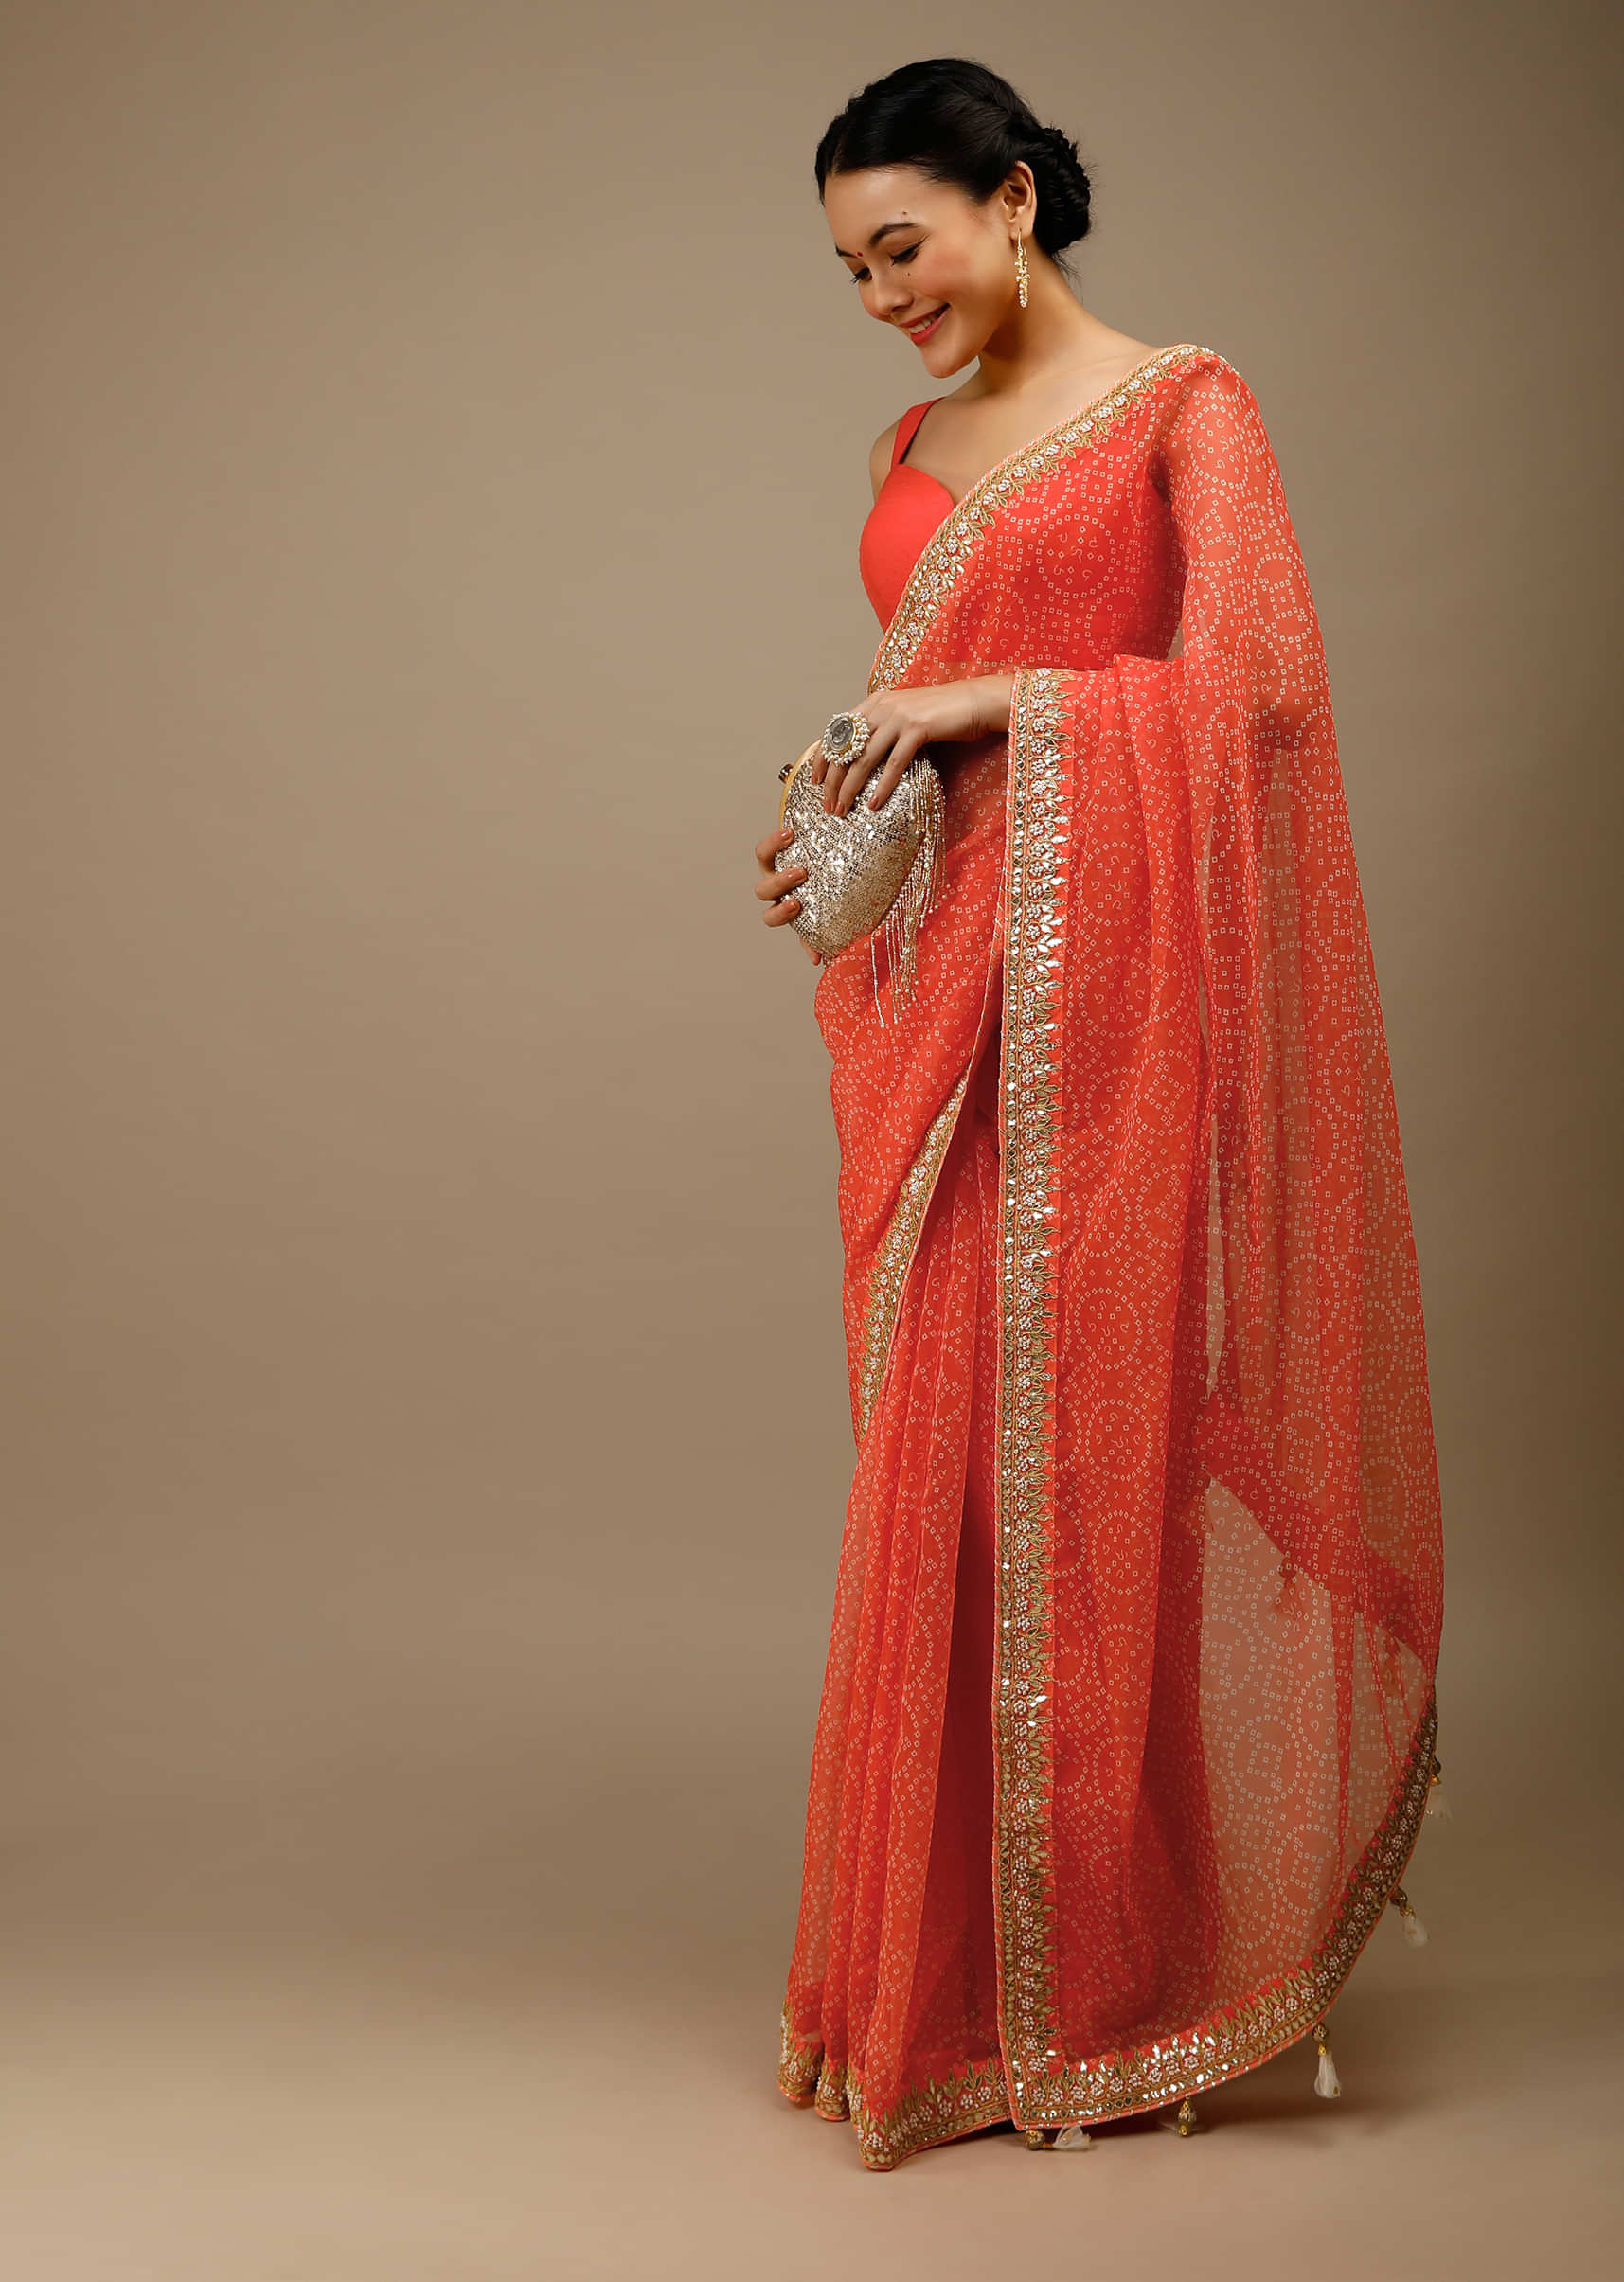 Camelia Orange Saree In Organza With Bandhani Jaal And Gotta Patti Embroidered Floral Motifs On The Border  